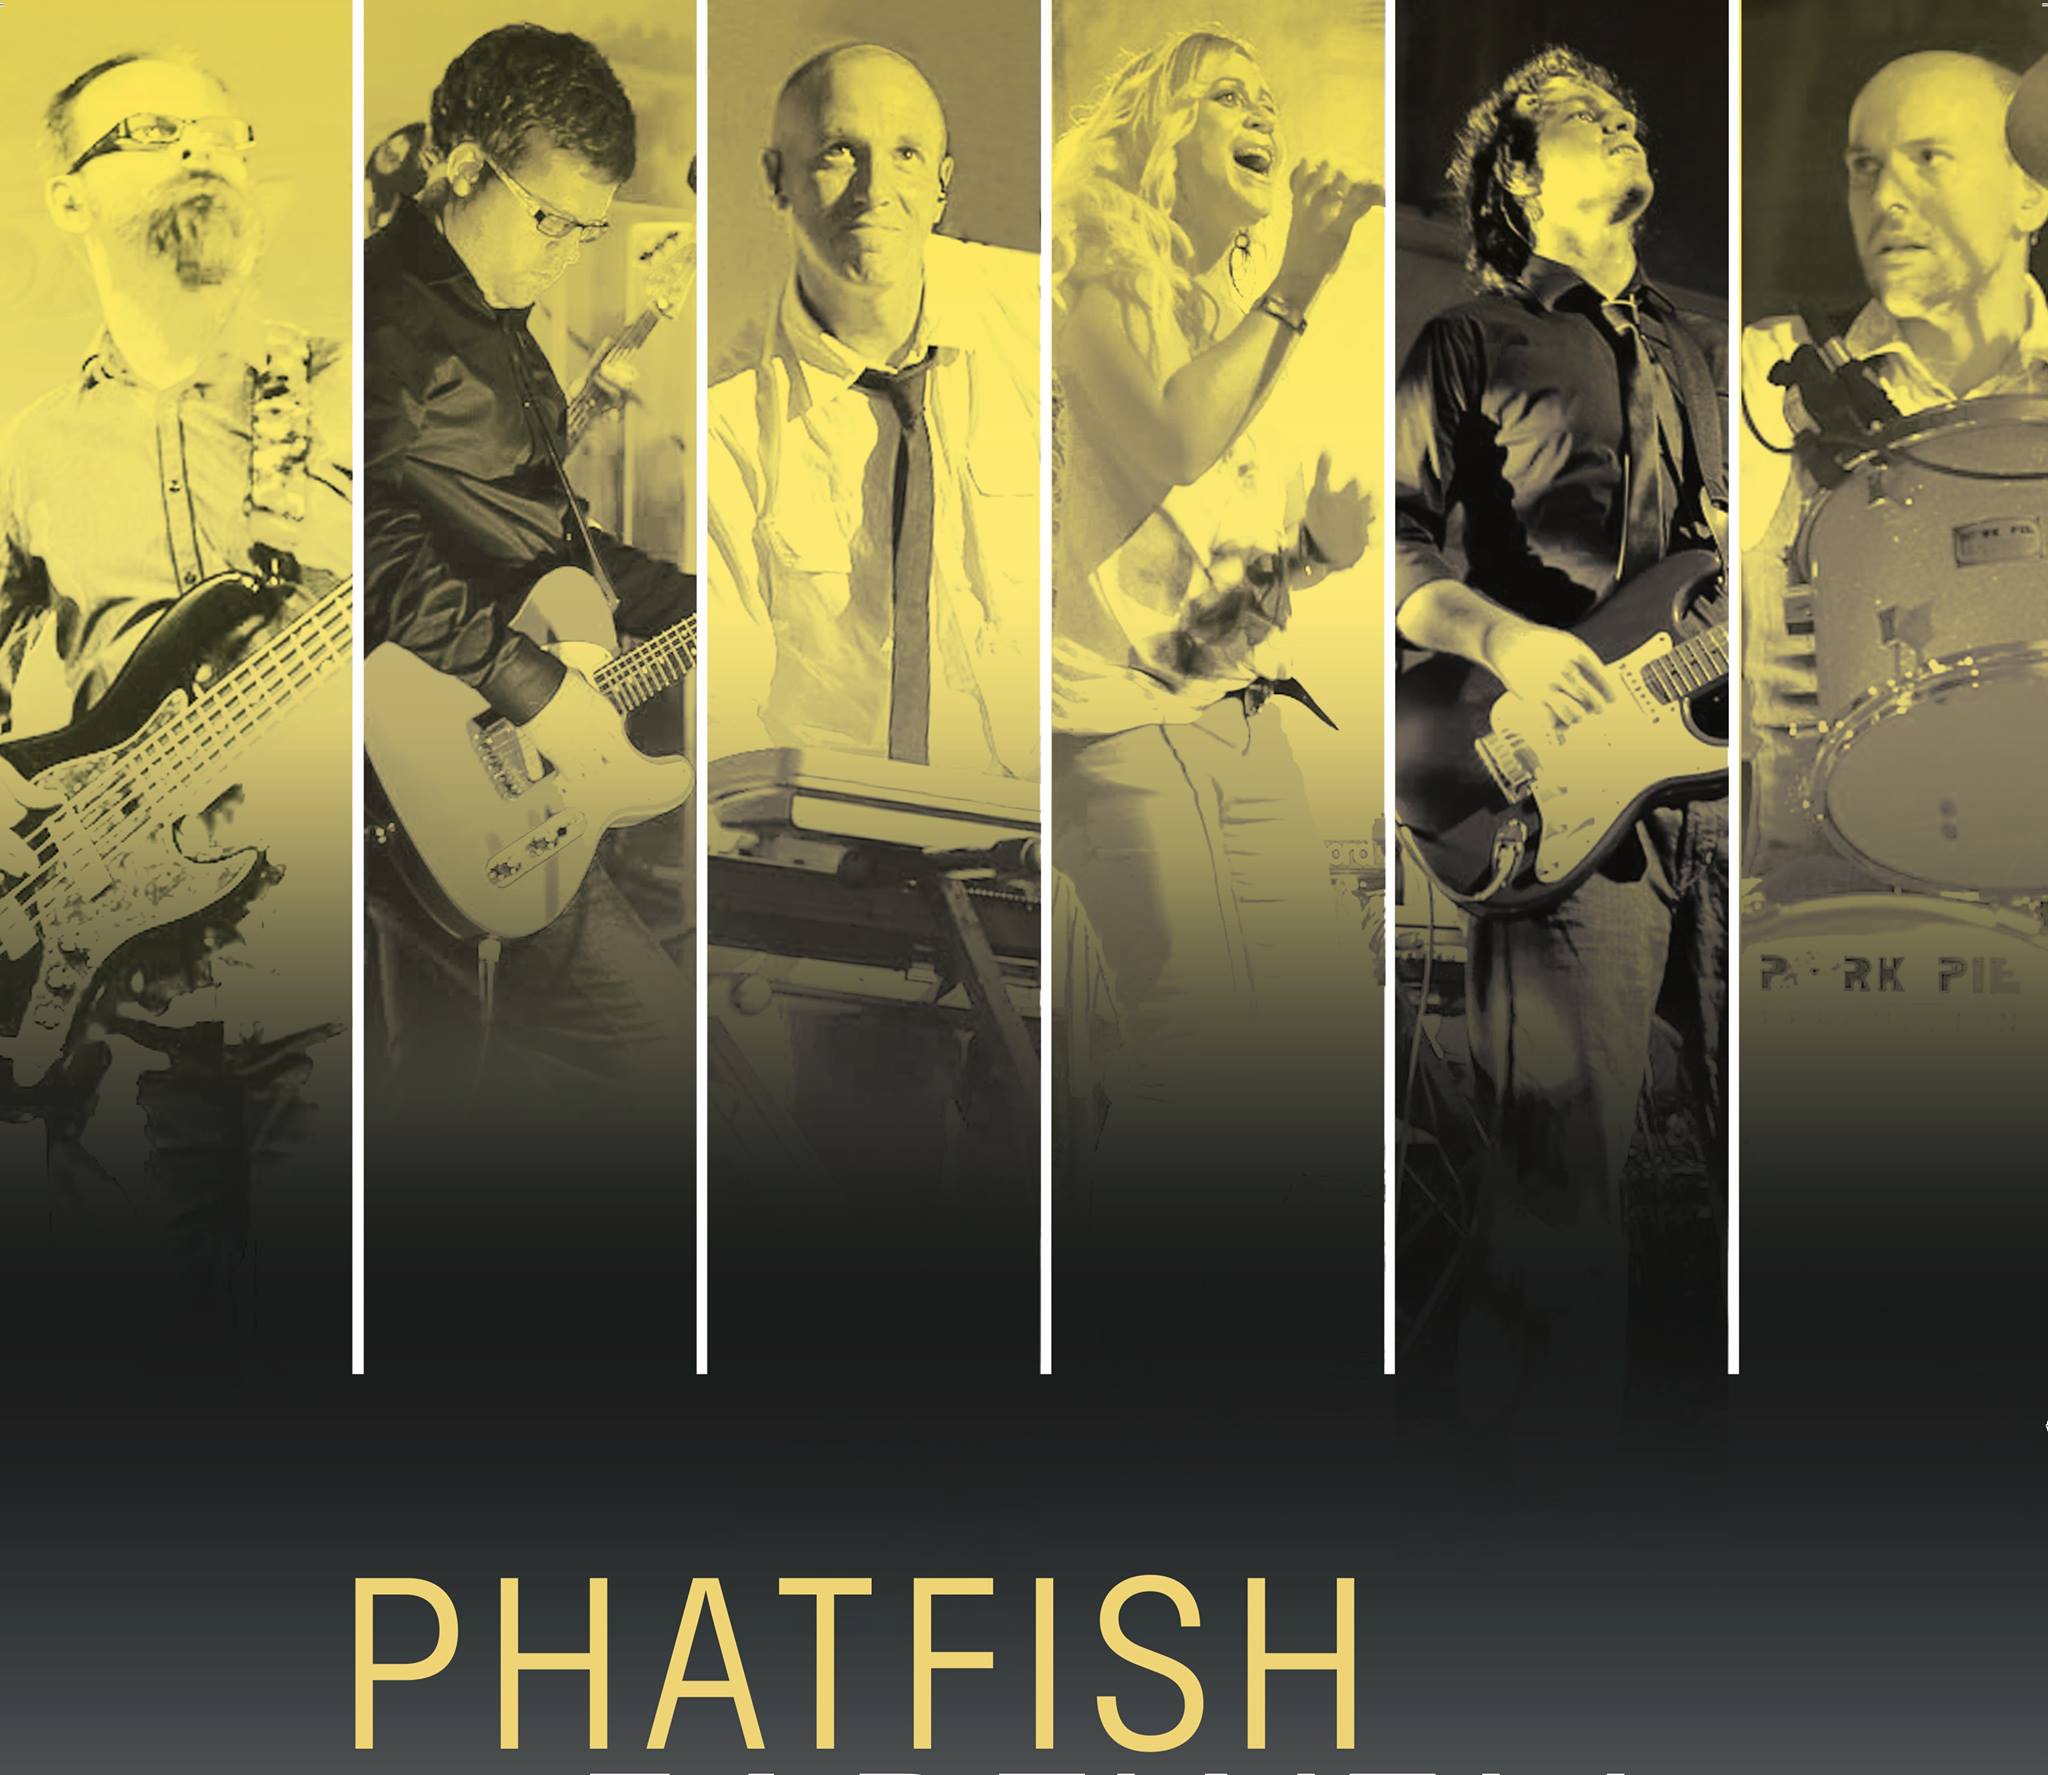 Phatfish Prepare To Take The Stage For The Last Time